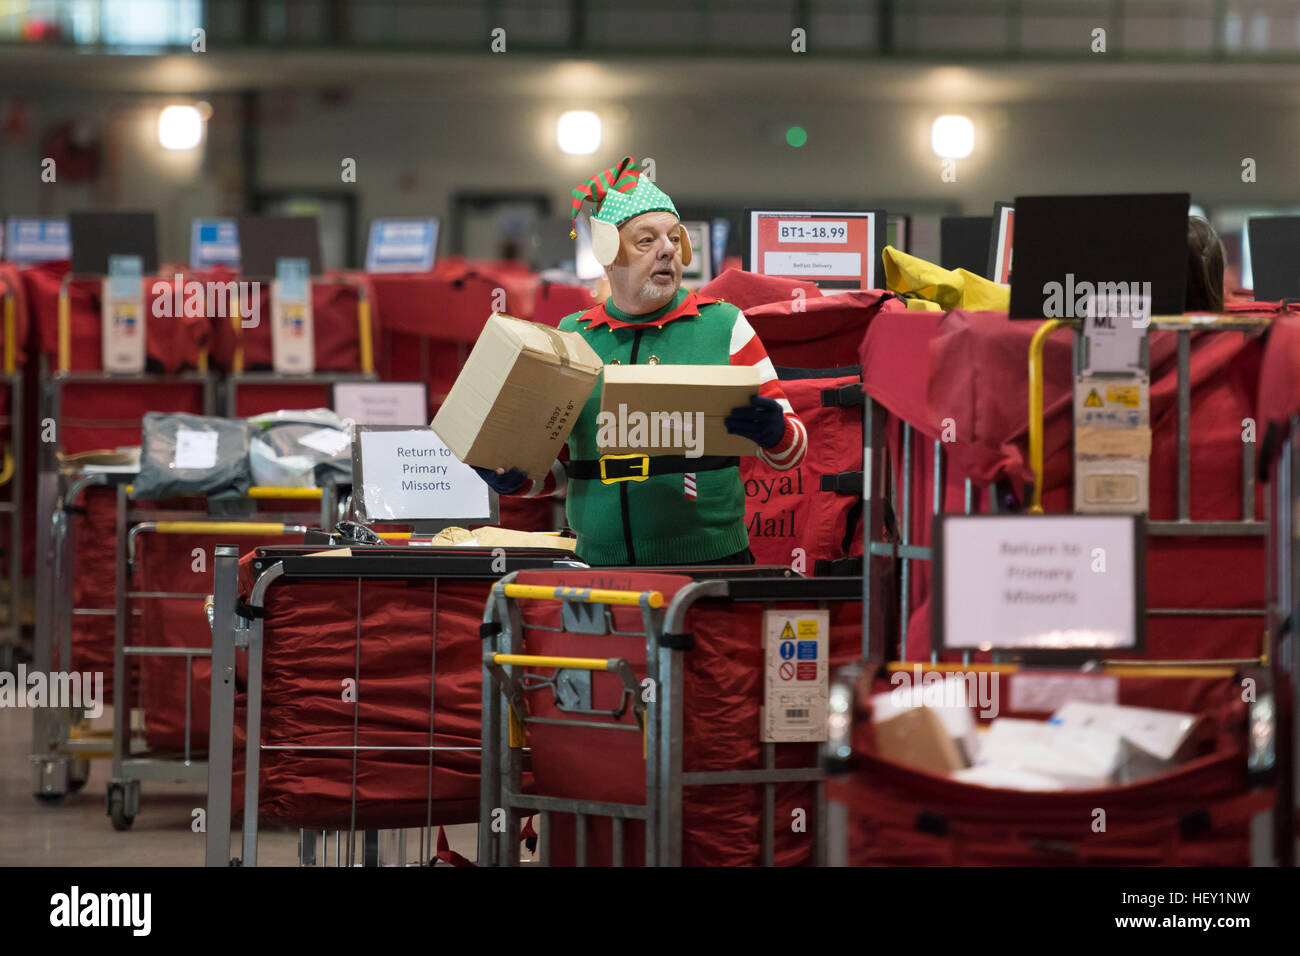 Royal Mail Christmas temp workers process Christmas mail at the Royal Mail Christmas sorting office in Llantrisant, South Wales, UK. Stock Photo